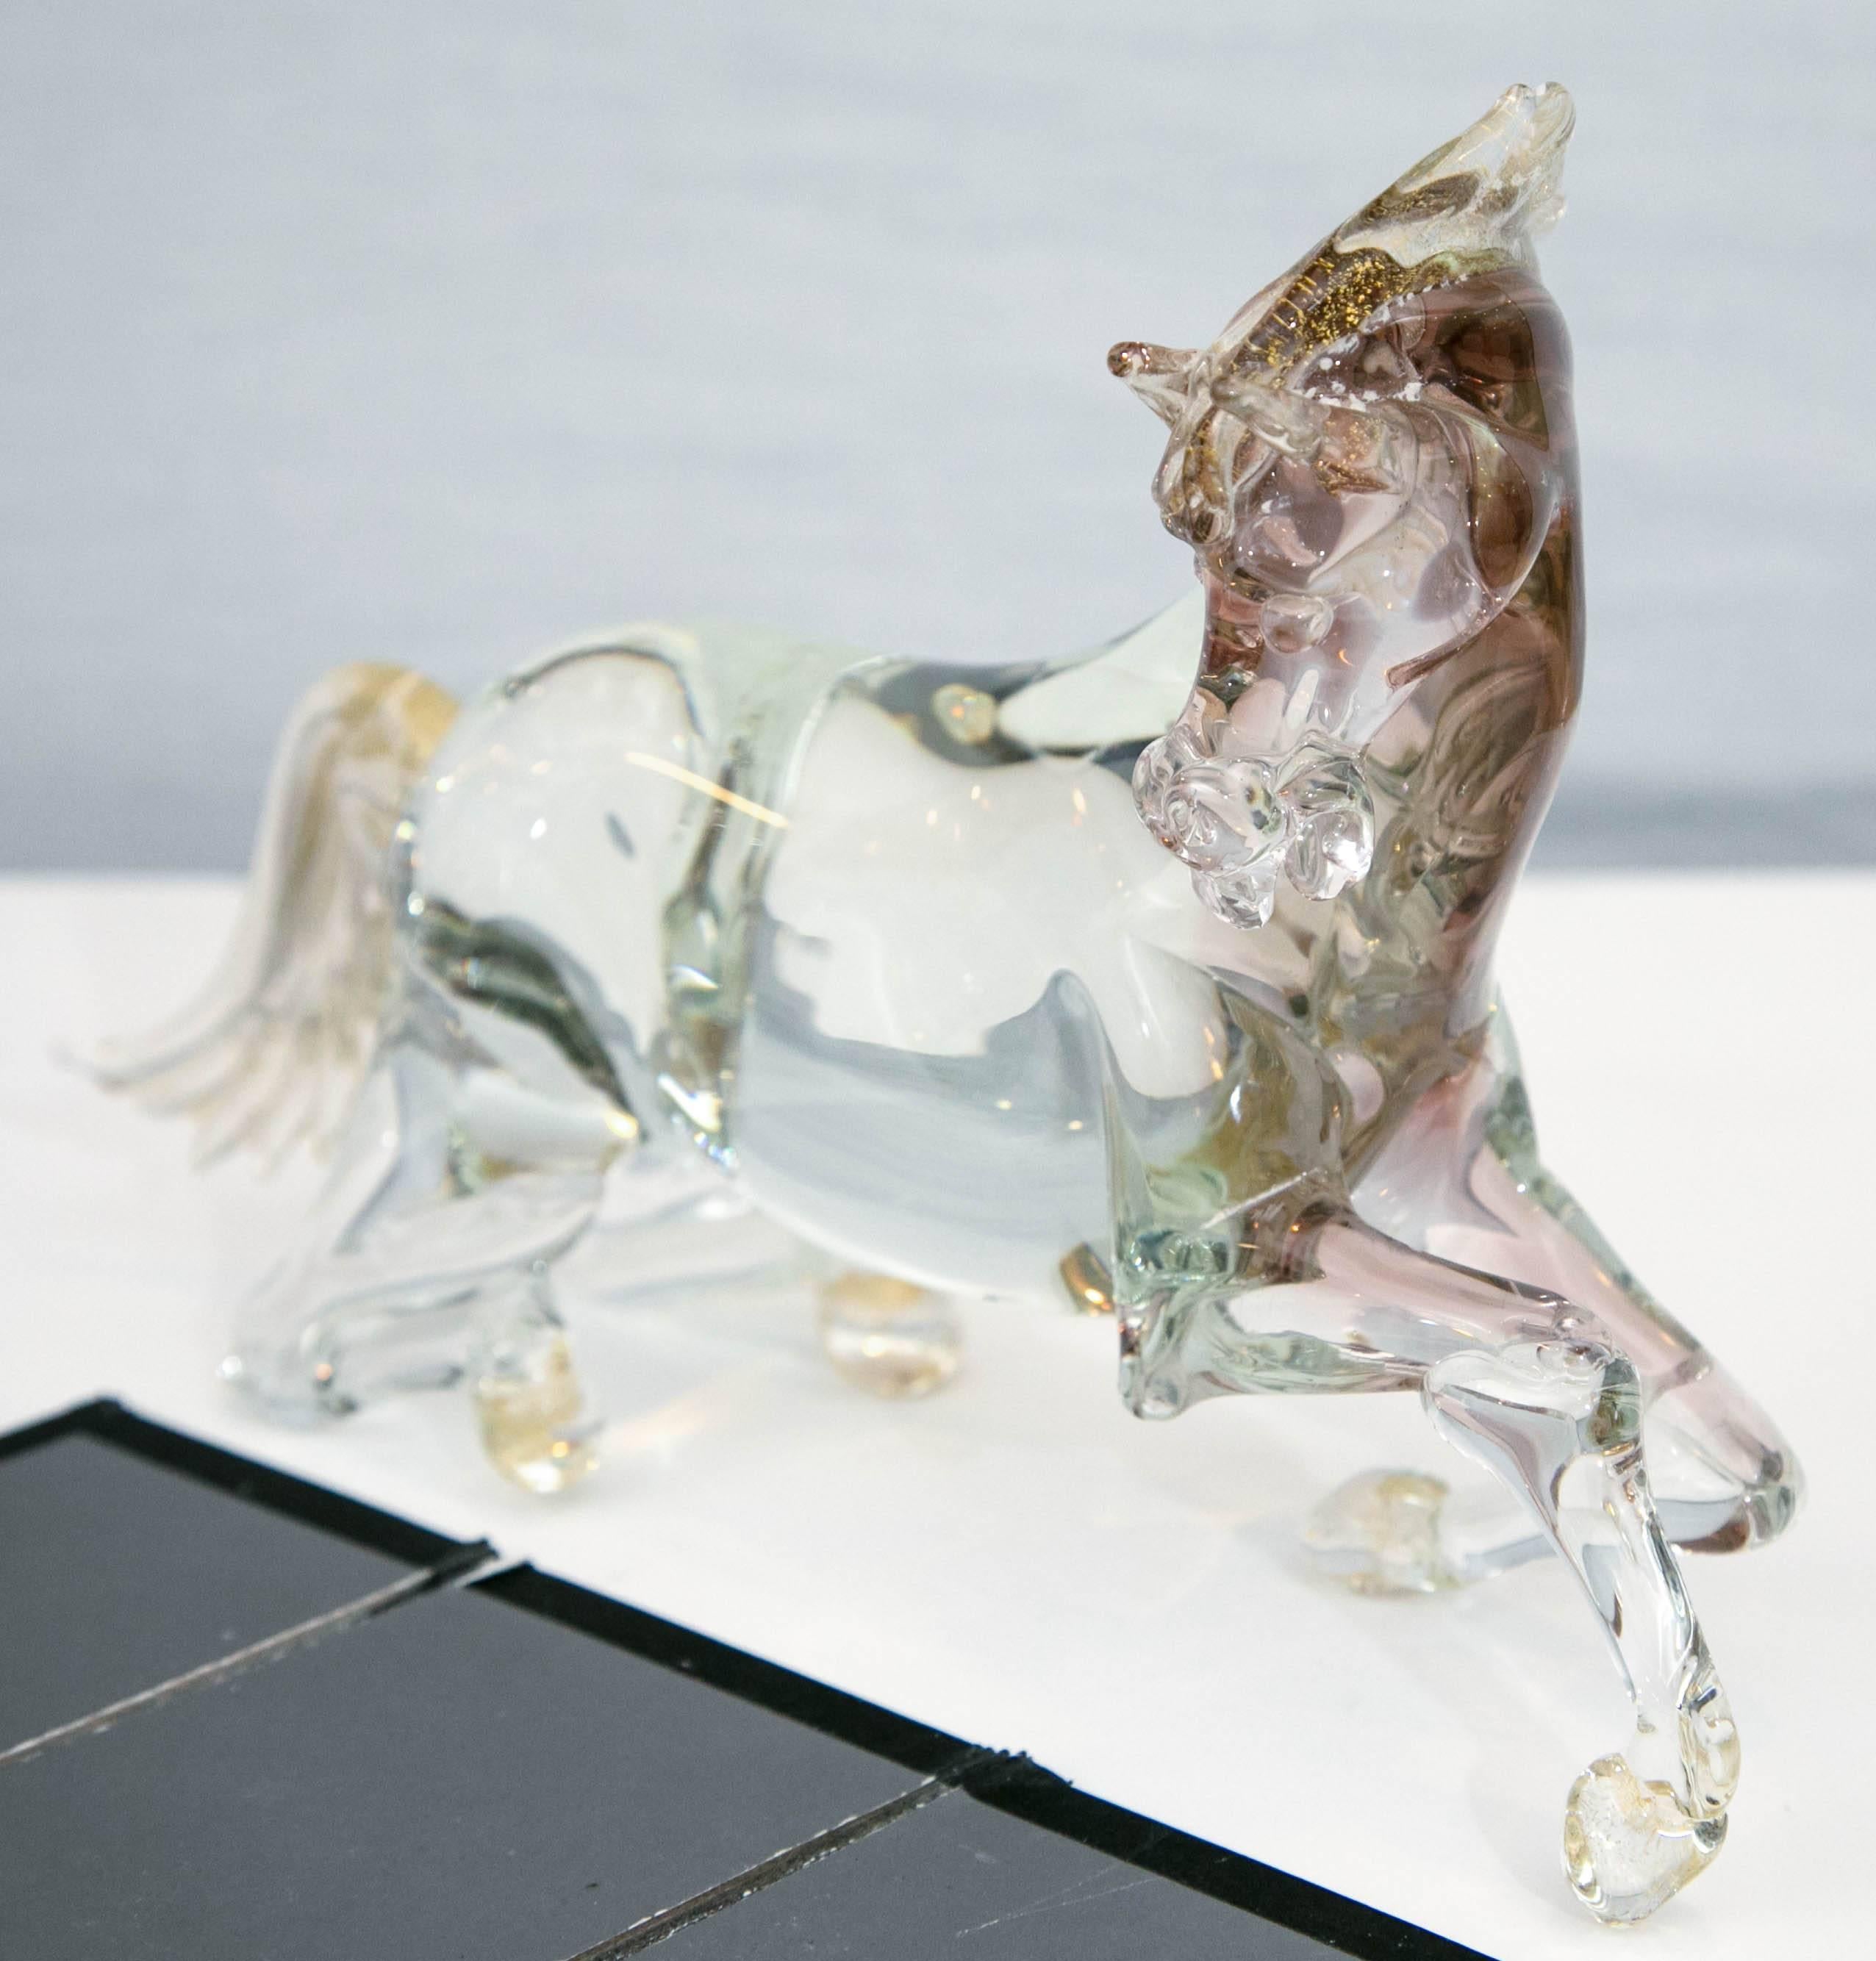 Magnificent handcrafted Murano glass horse sculpture attributed to Giancarlo Signoretto. Shades of purple and fleck of gold in solid glass sculpture.